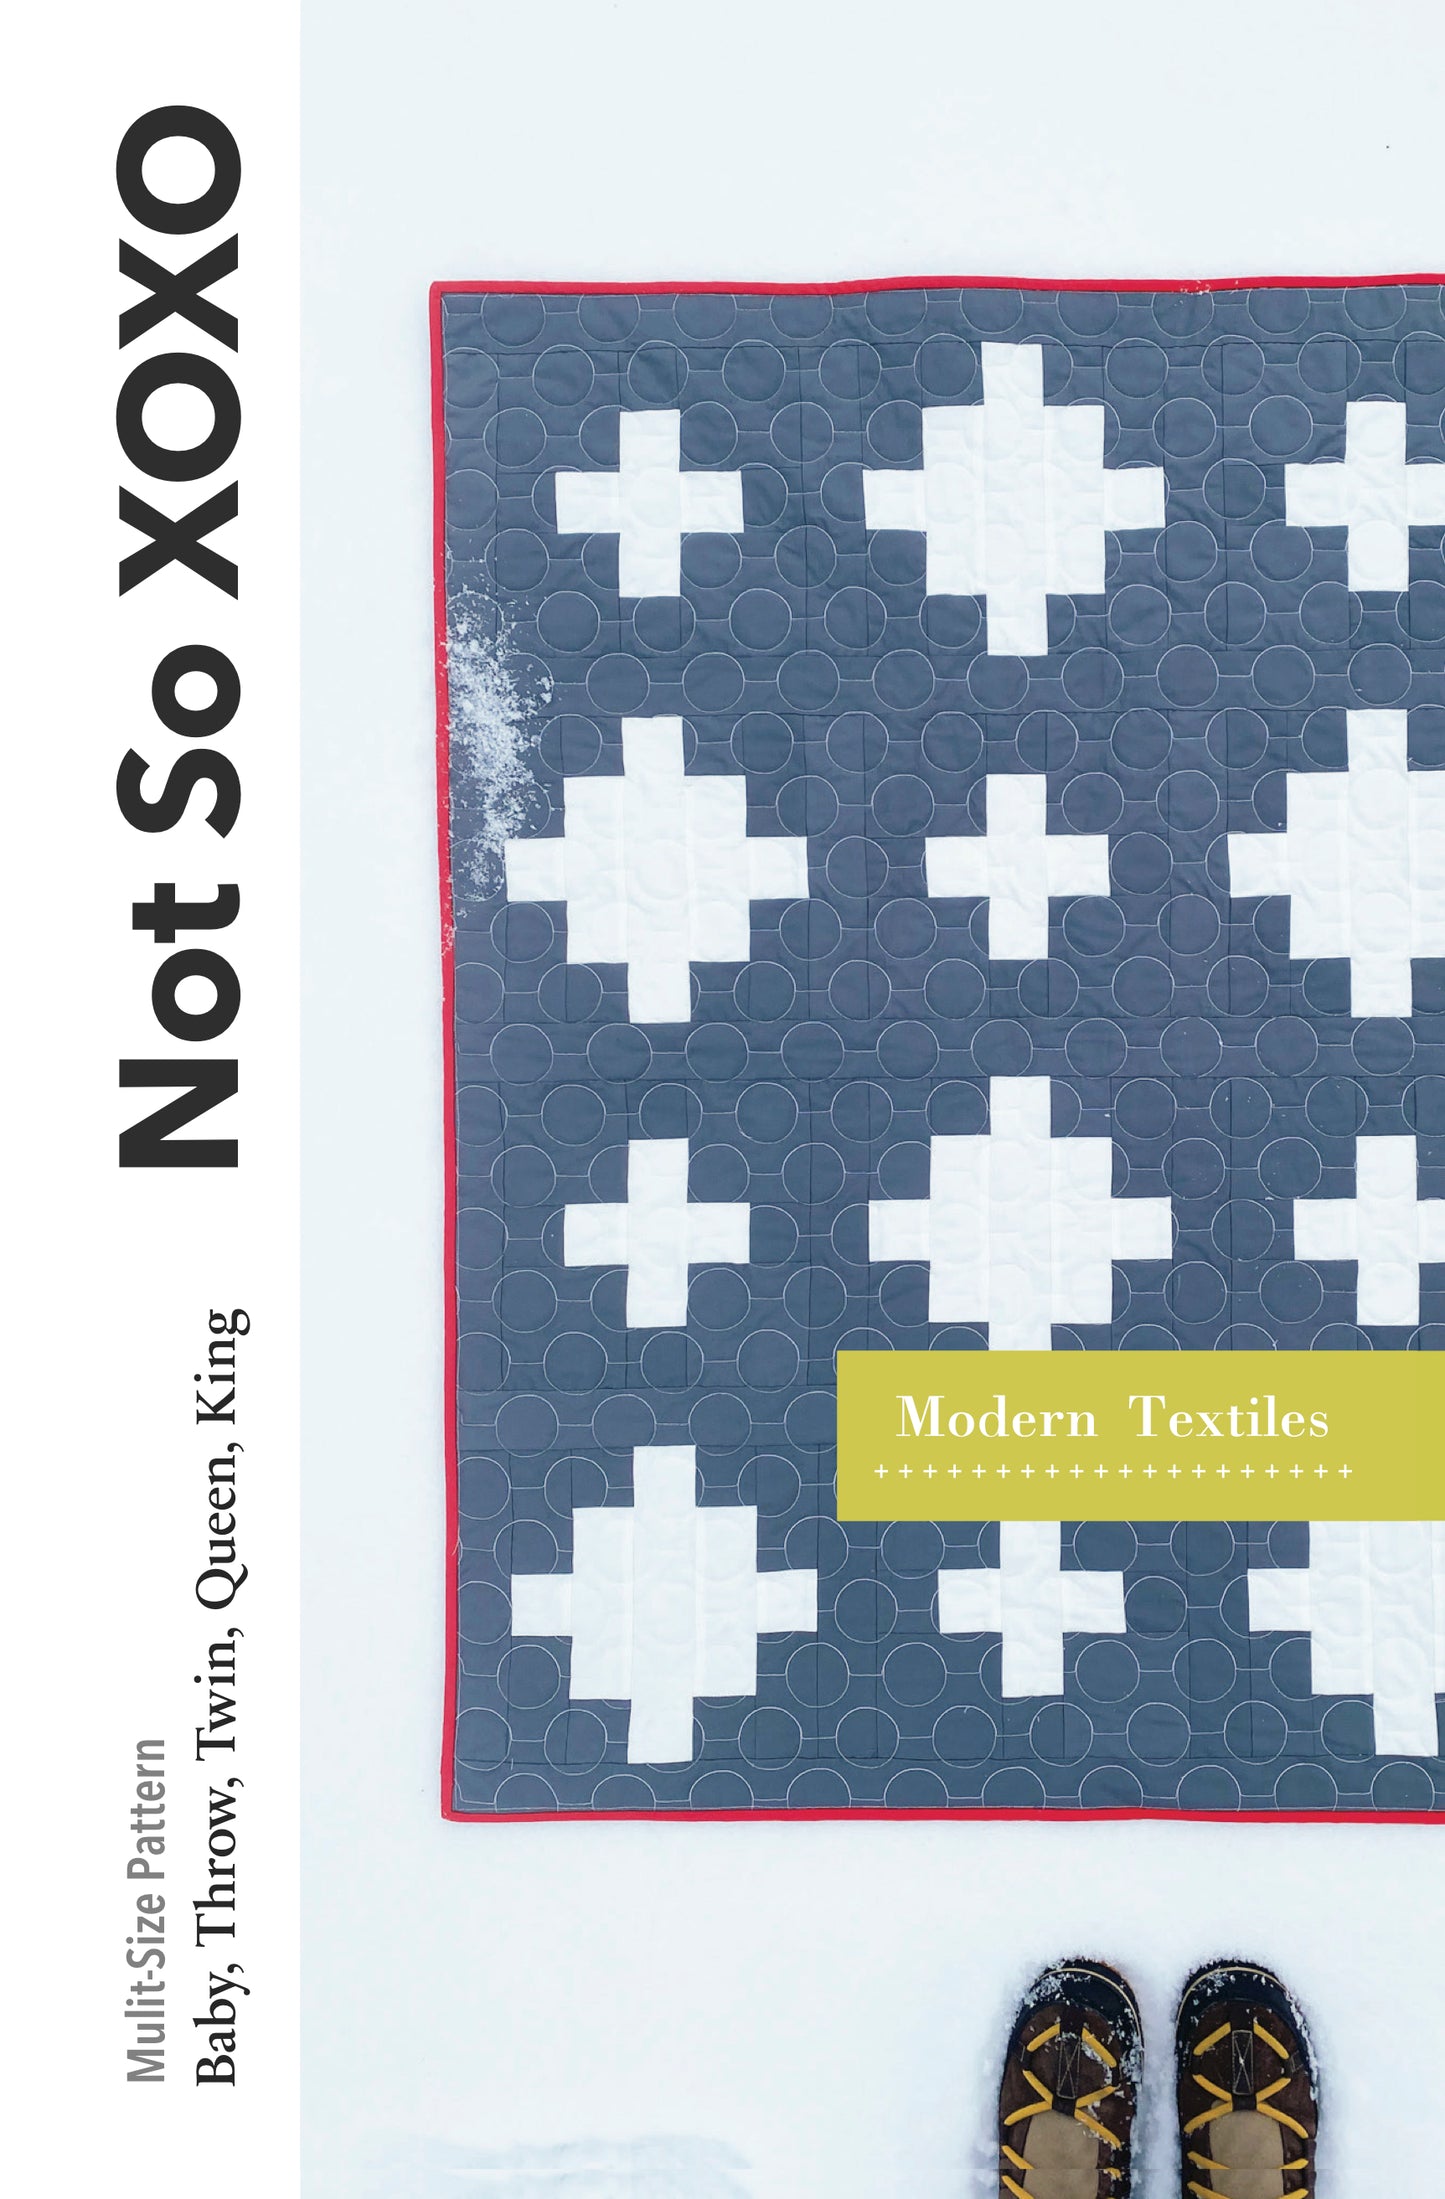 Not So XOXO Quilt PDF Quilt Pattern - Download